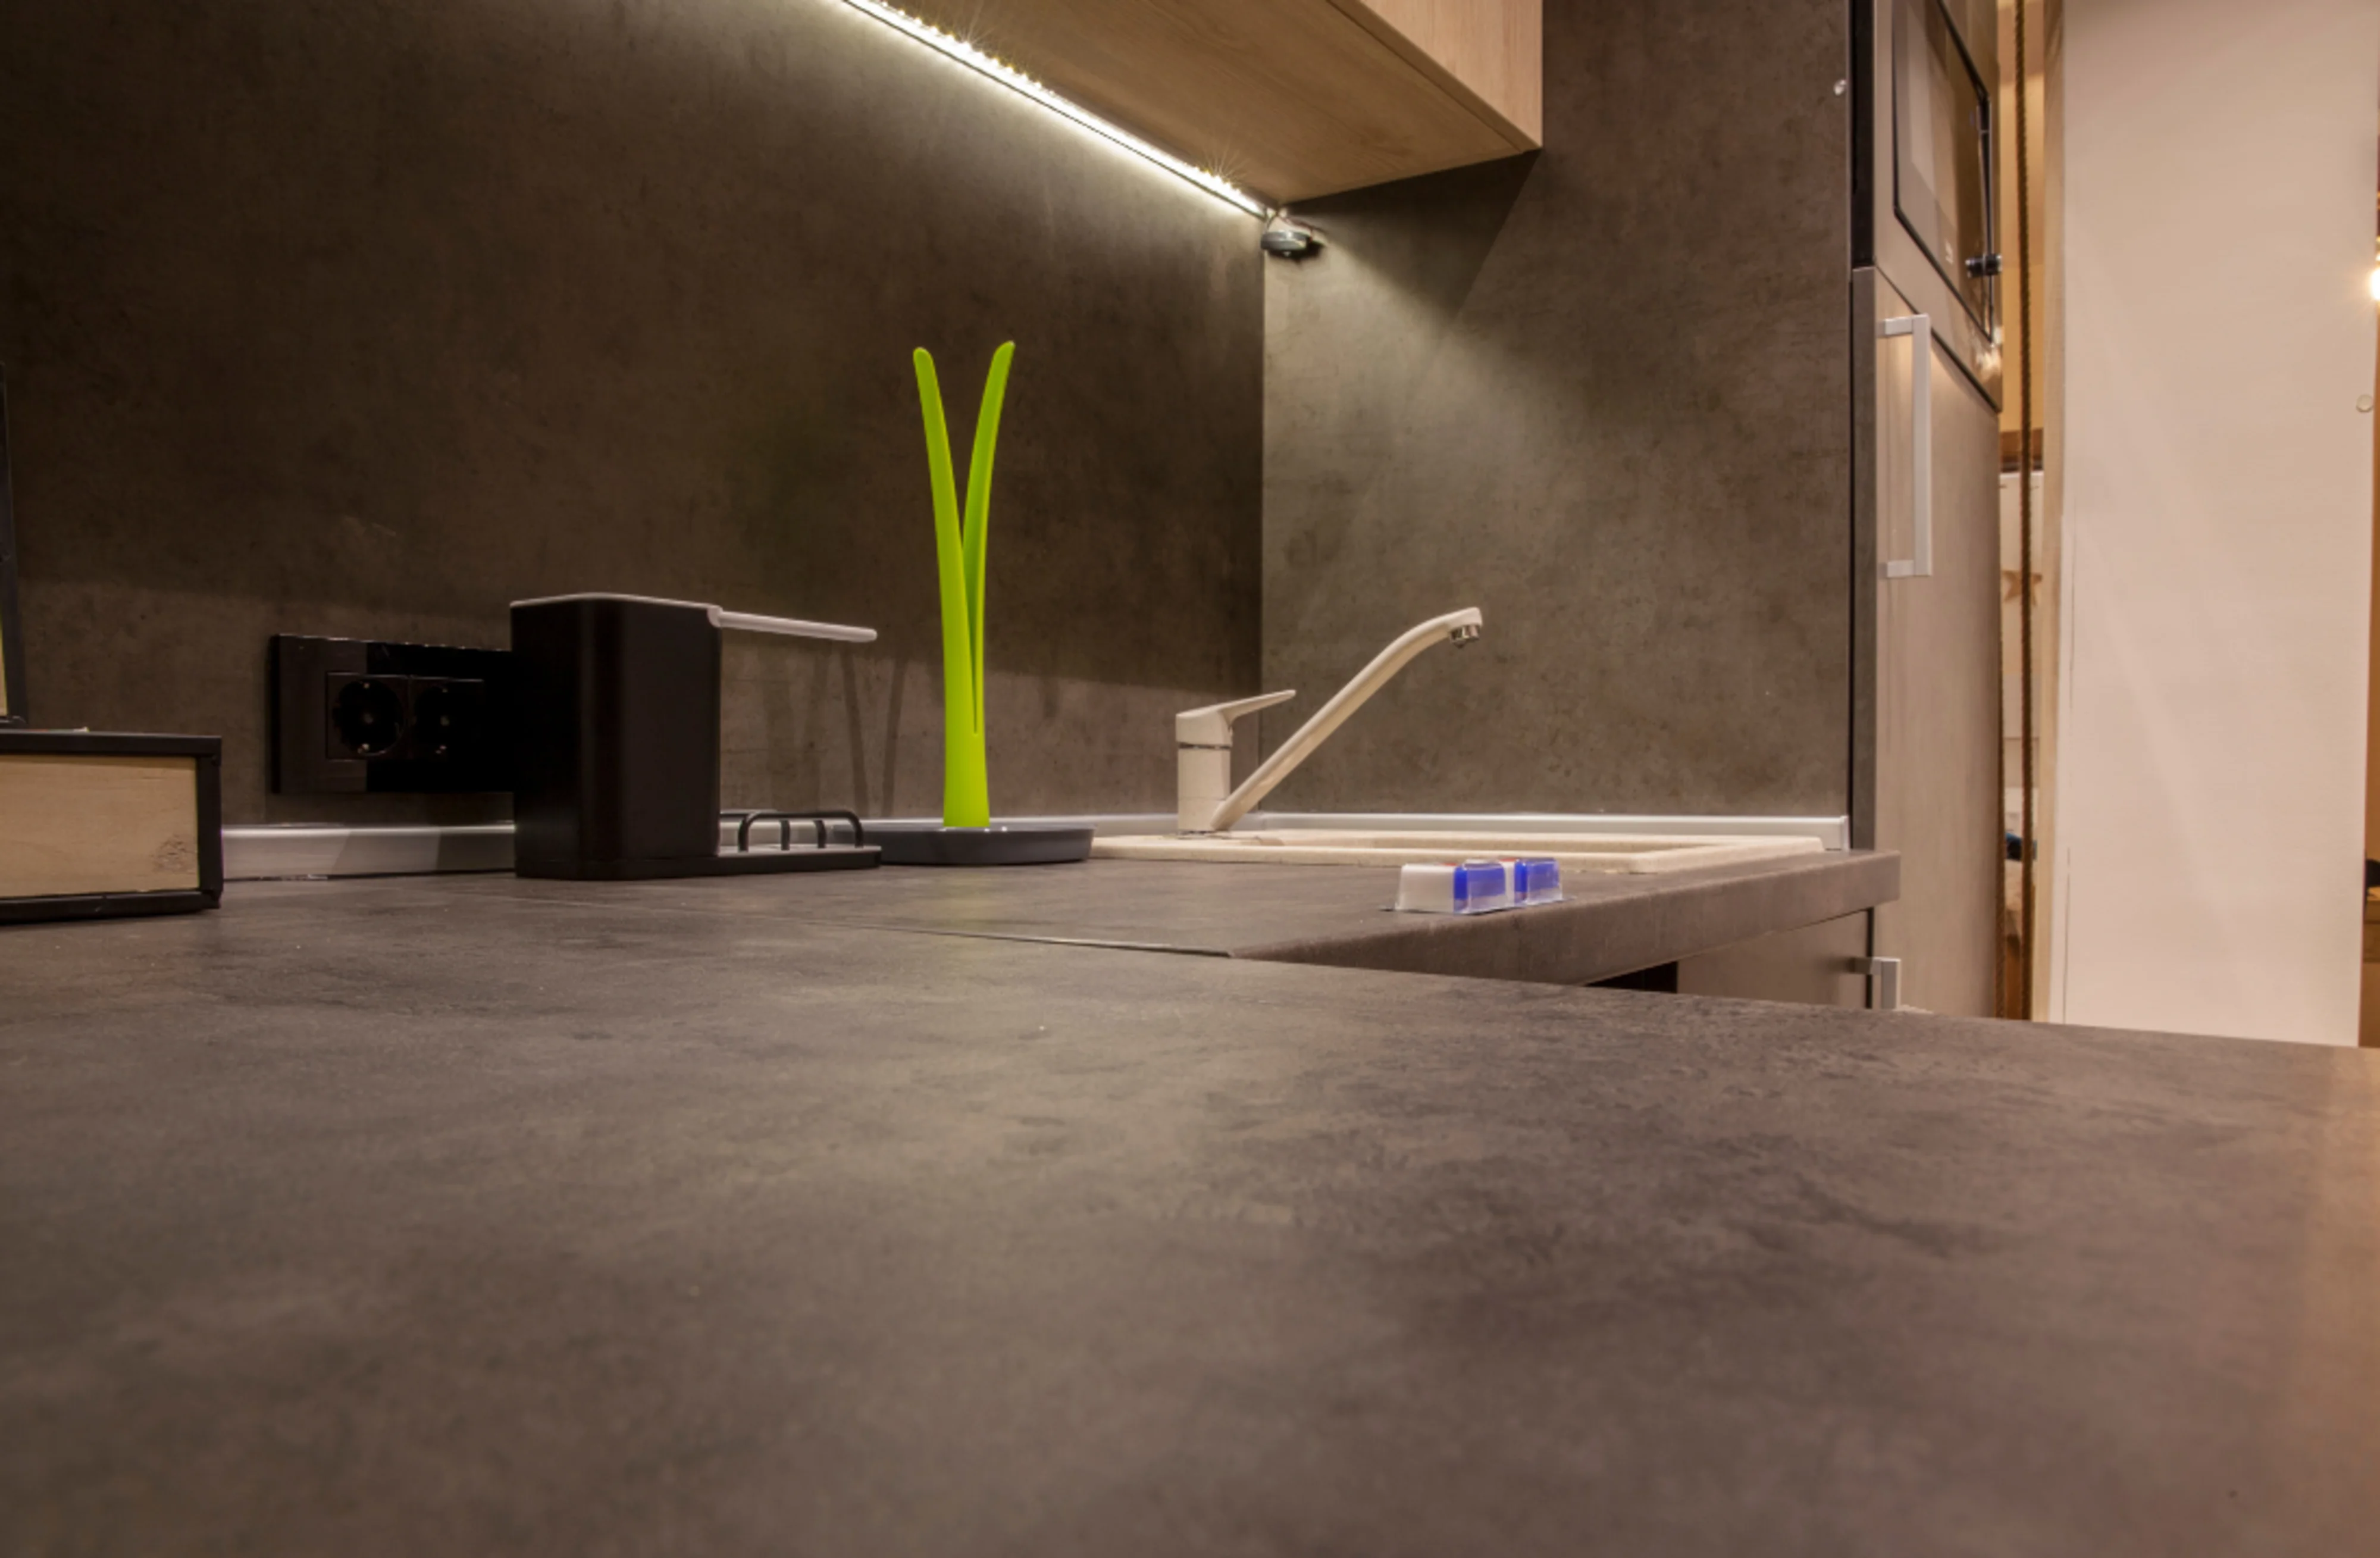 A black kitchen Neolith worktop with a grey sink.